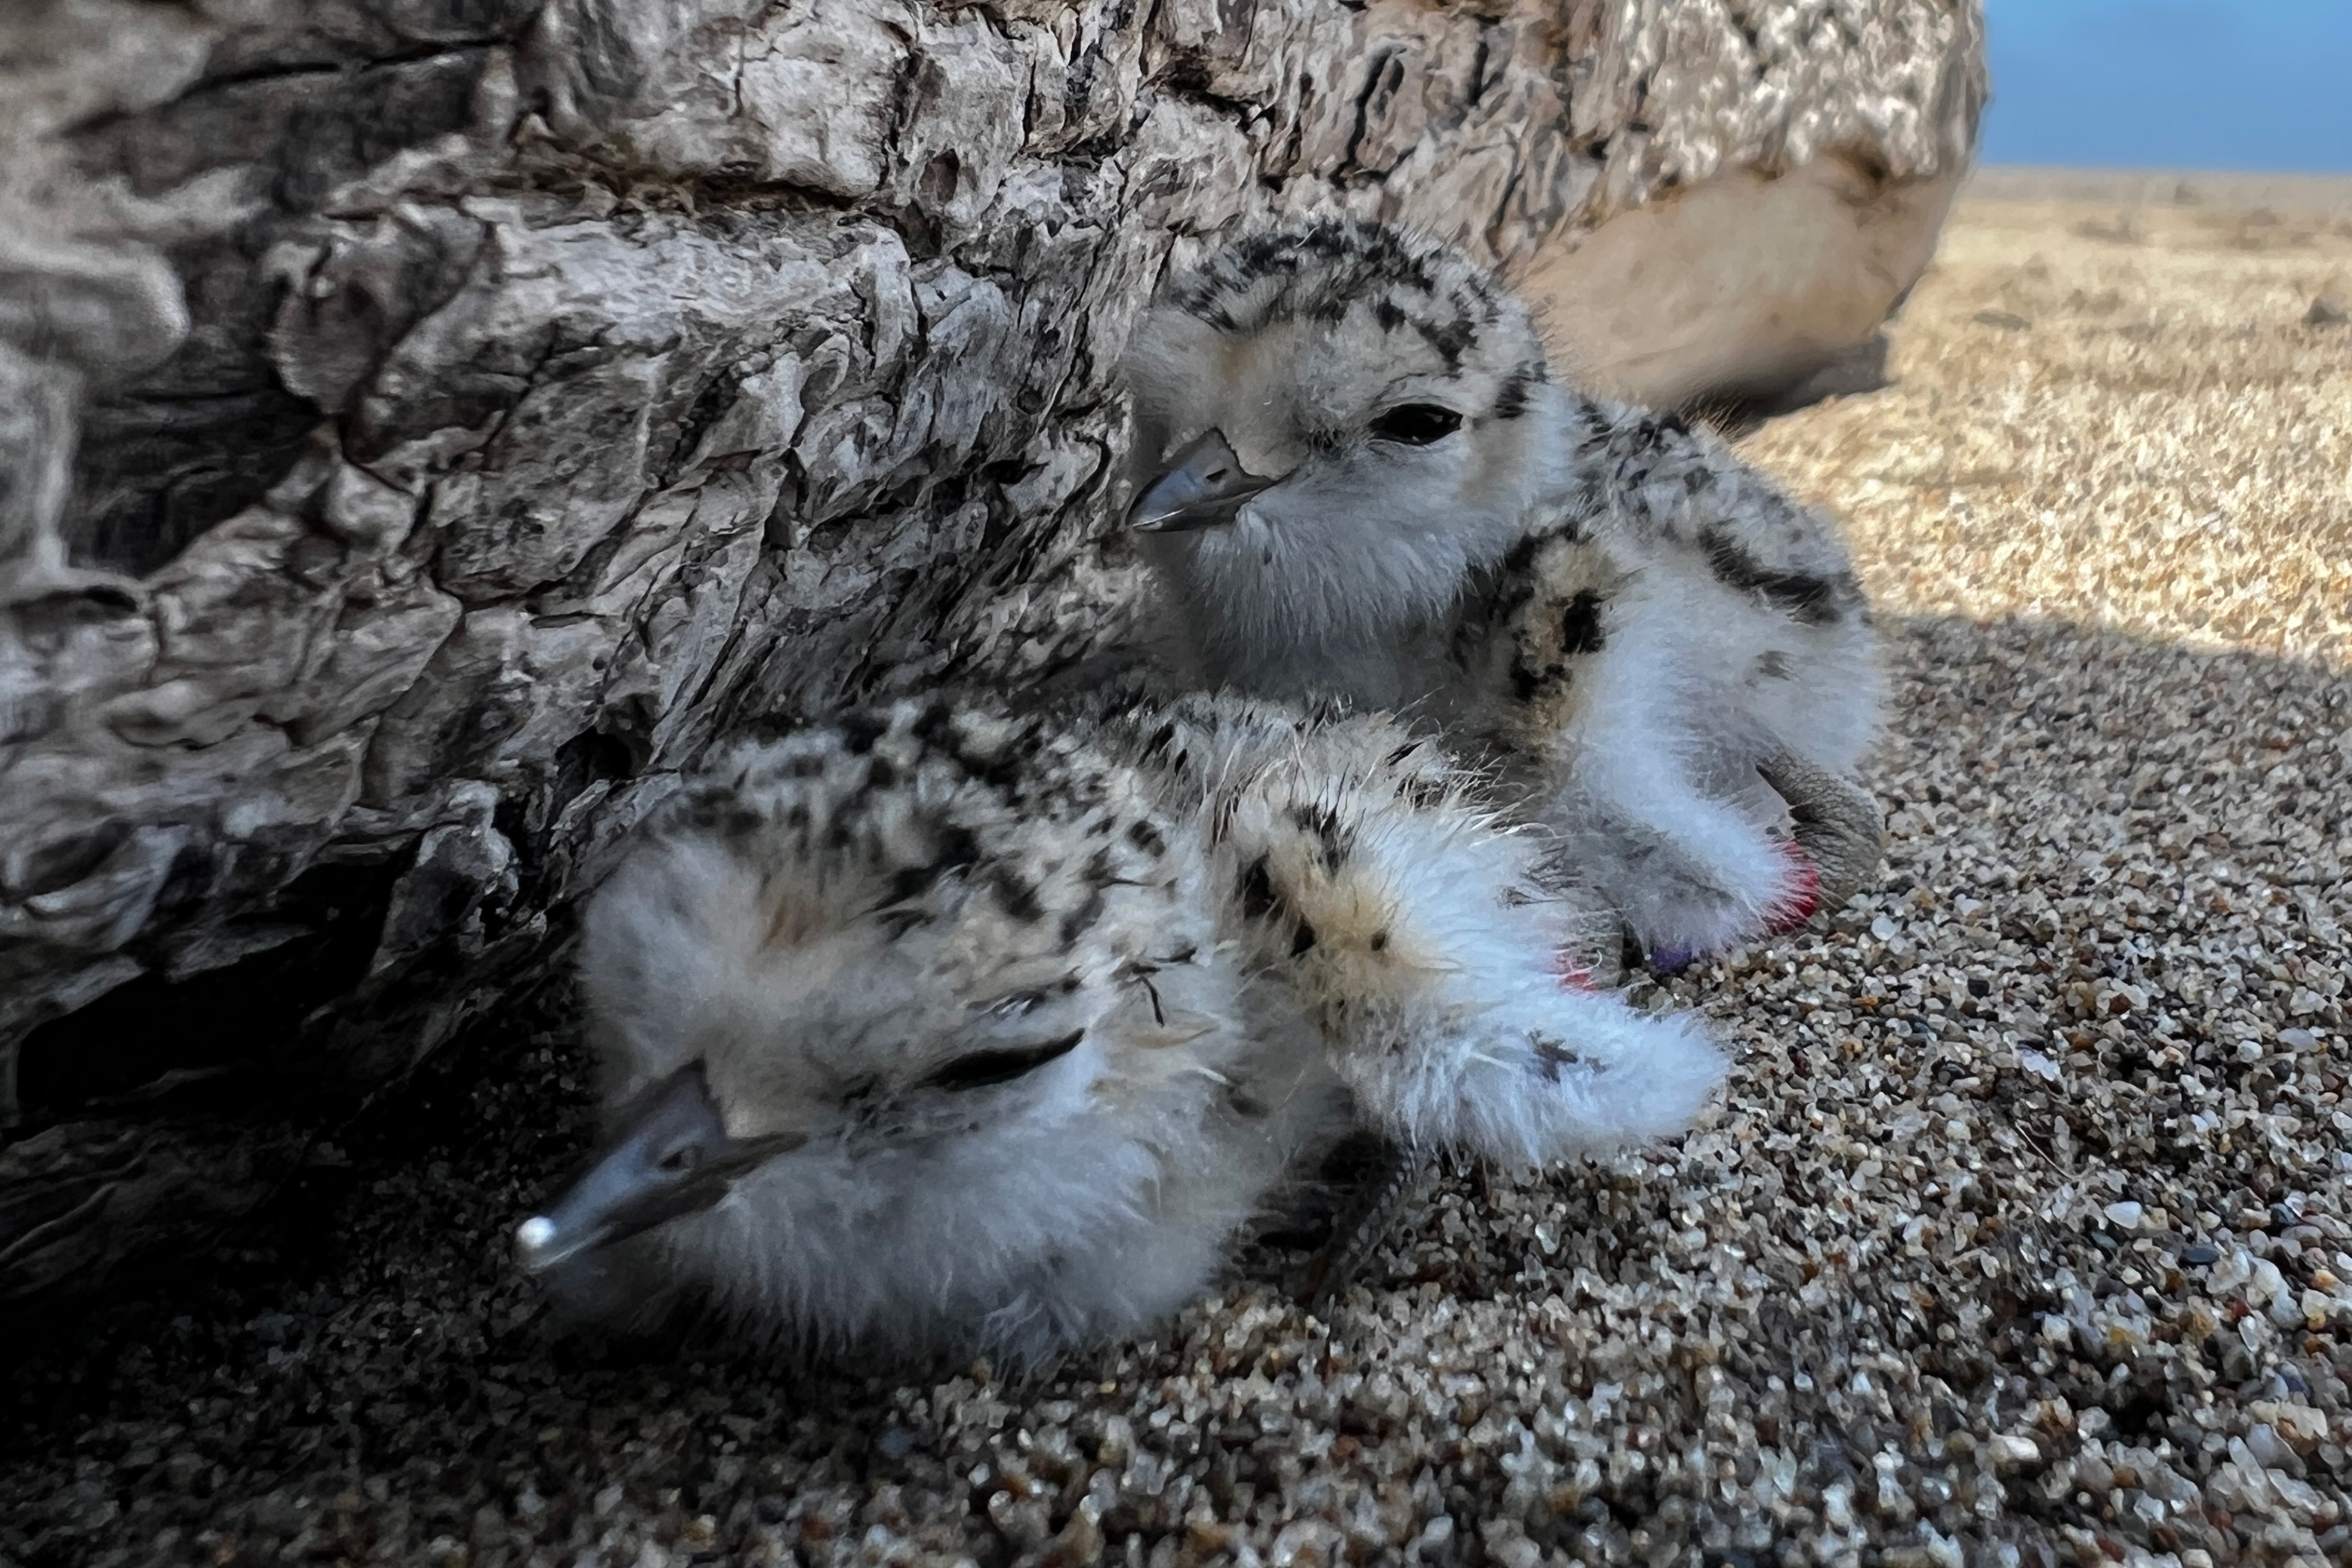 A photo of two small black-speckled, beige-colored chicks sitting on sand against the lower side of a driftwood log.